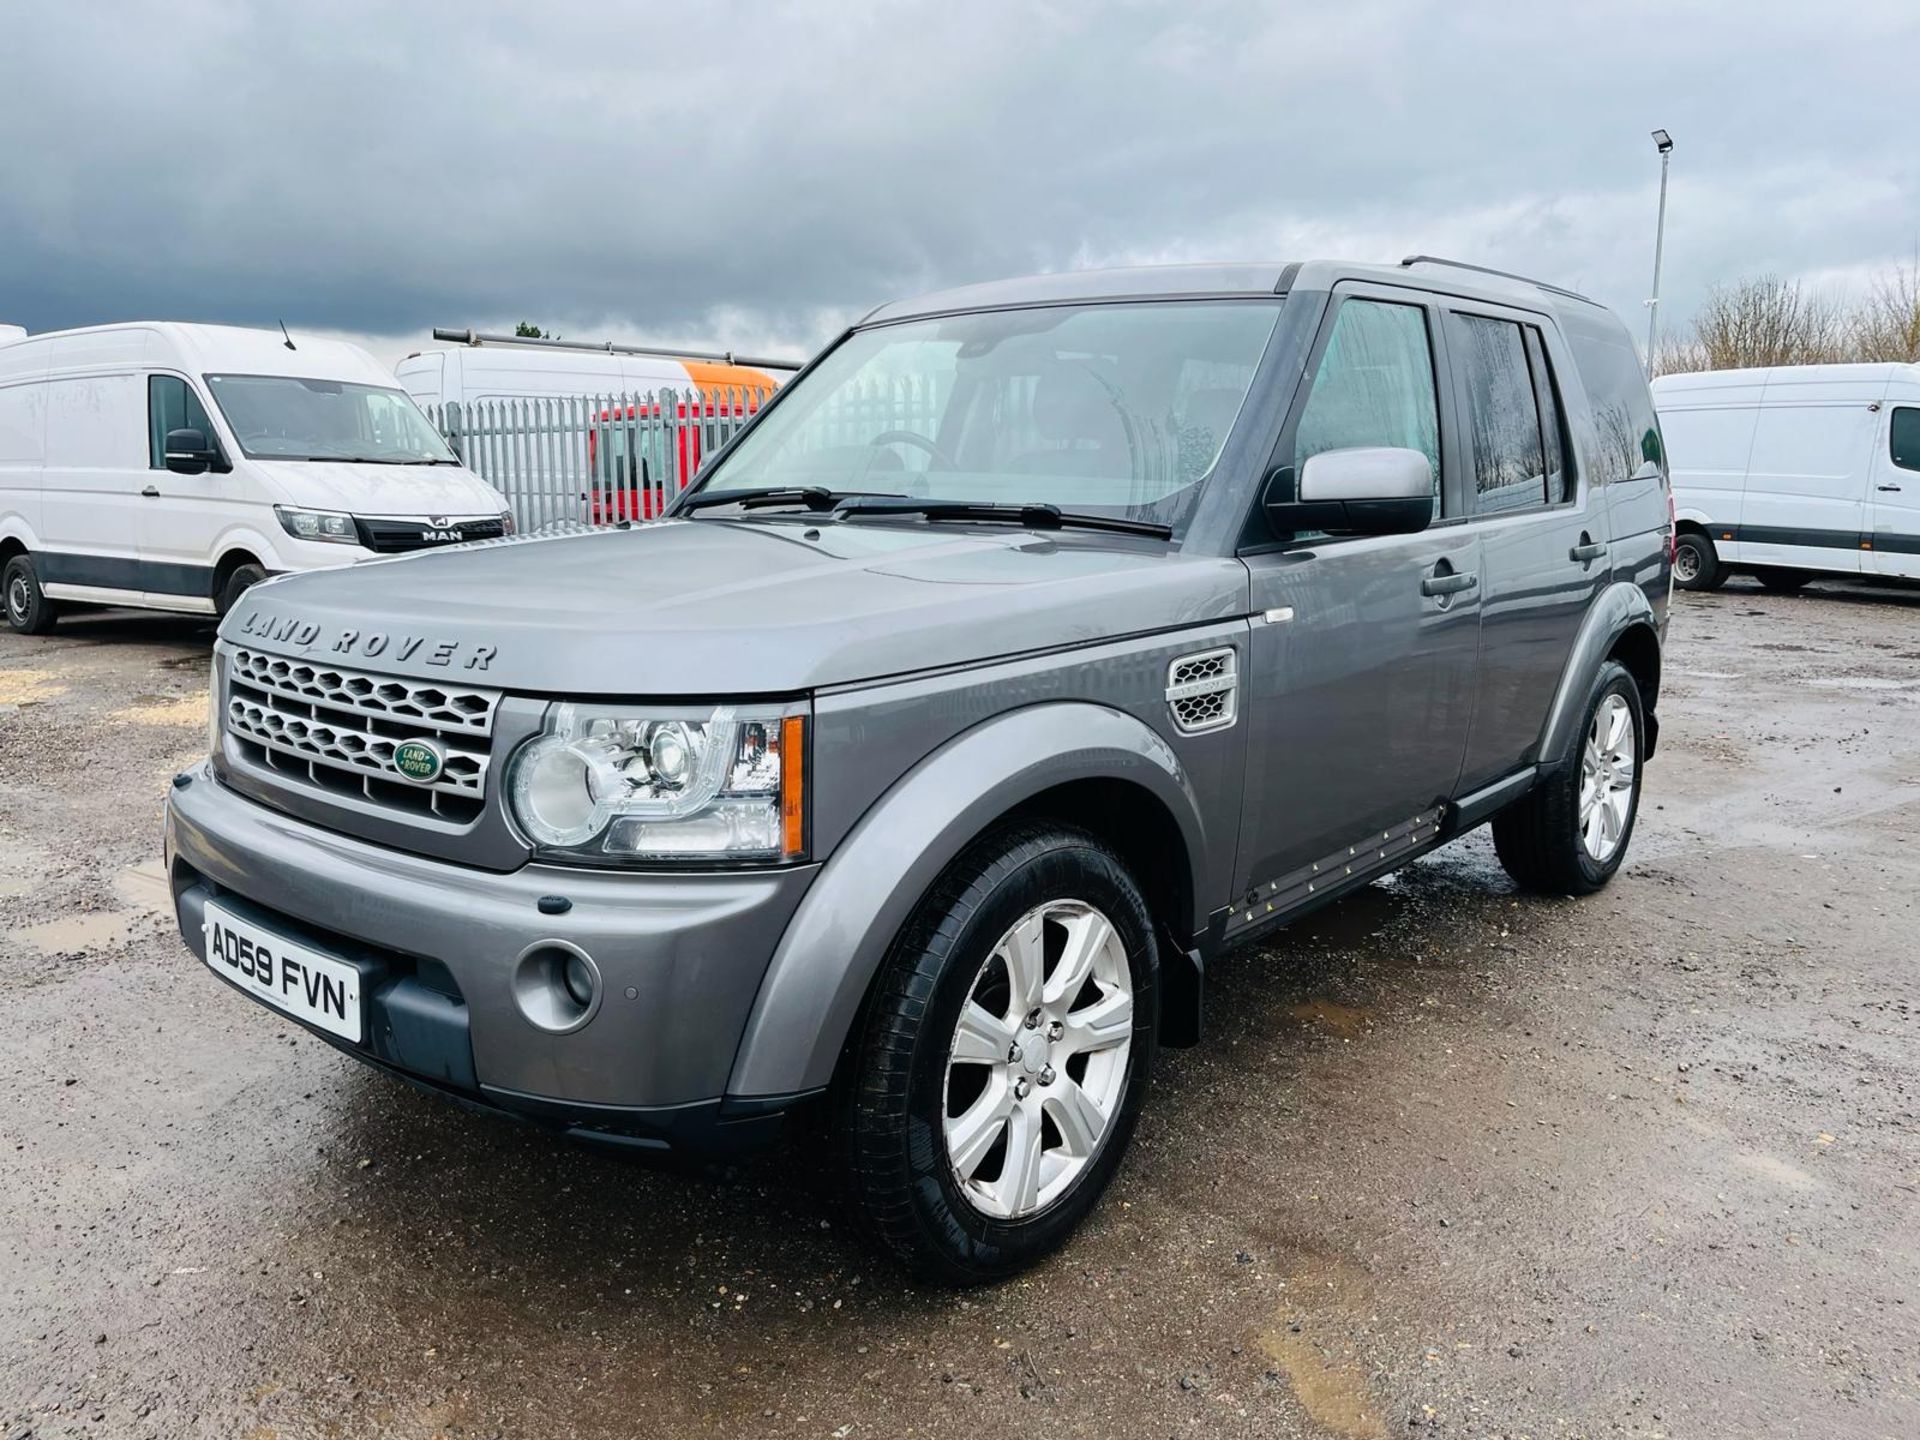 ** ON SALE ** Land Rover Discovery 4 3.0 TDV6 HSE 4WD 2009 '59 Reg' Full Spec - No Vat - 7 Seats - Image 3 of 39